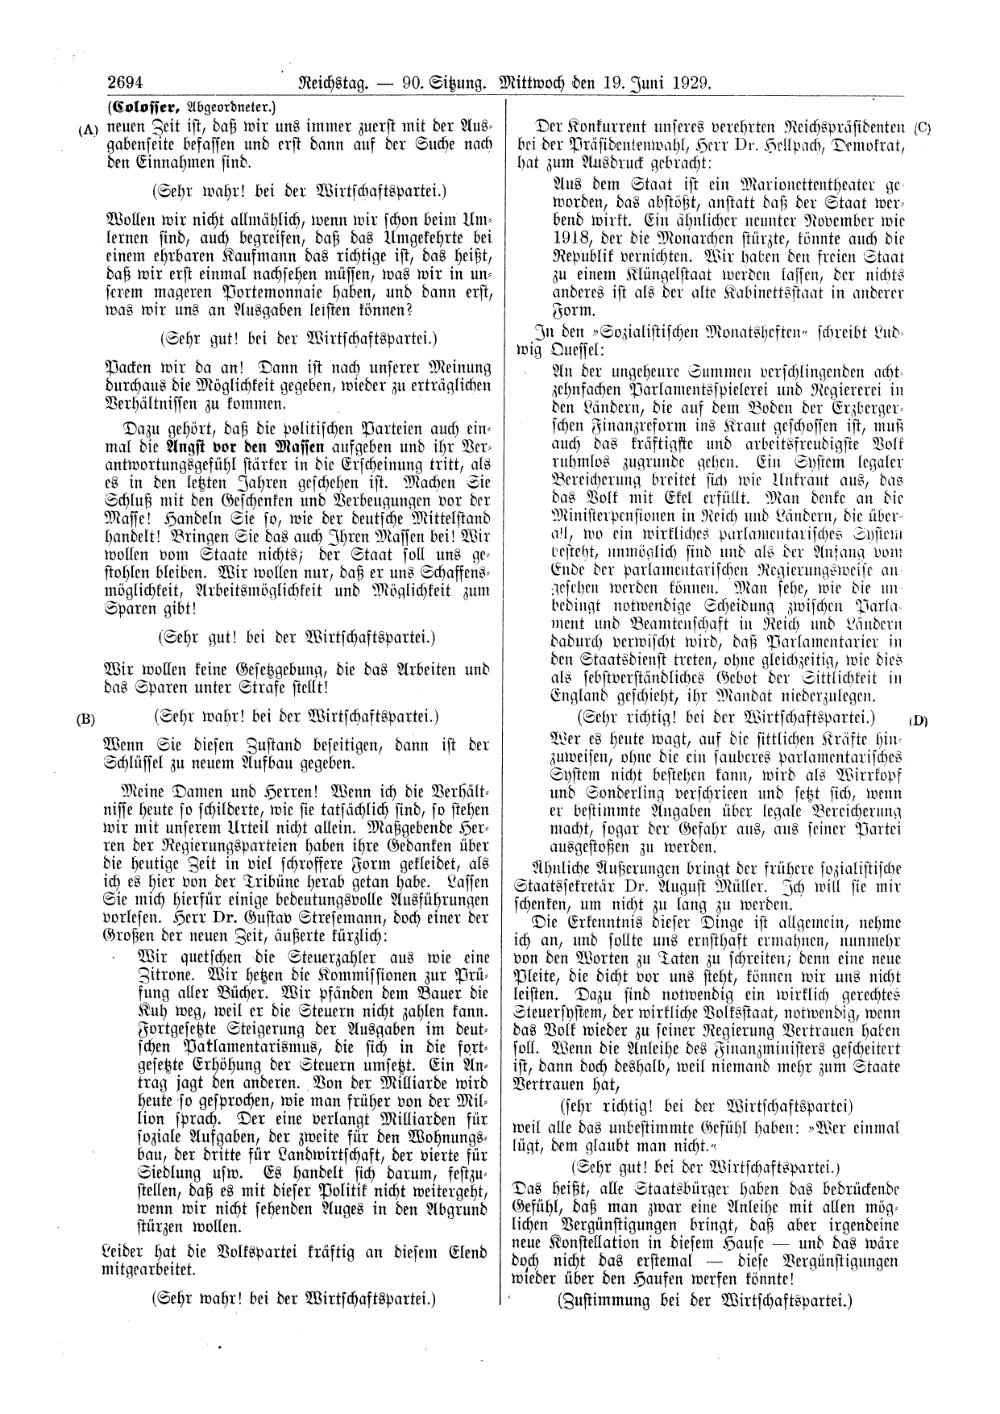 Scan of page 2694